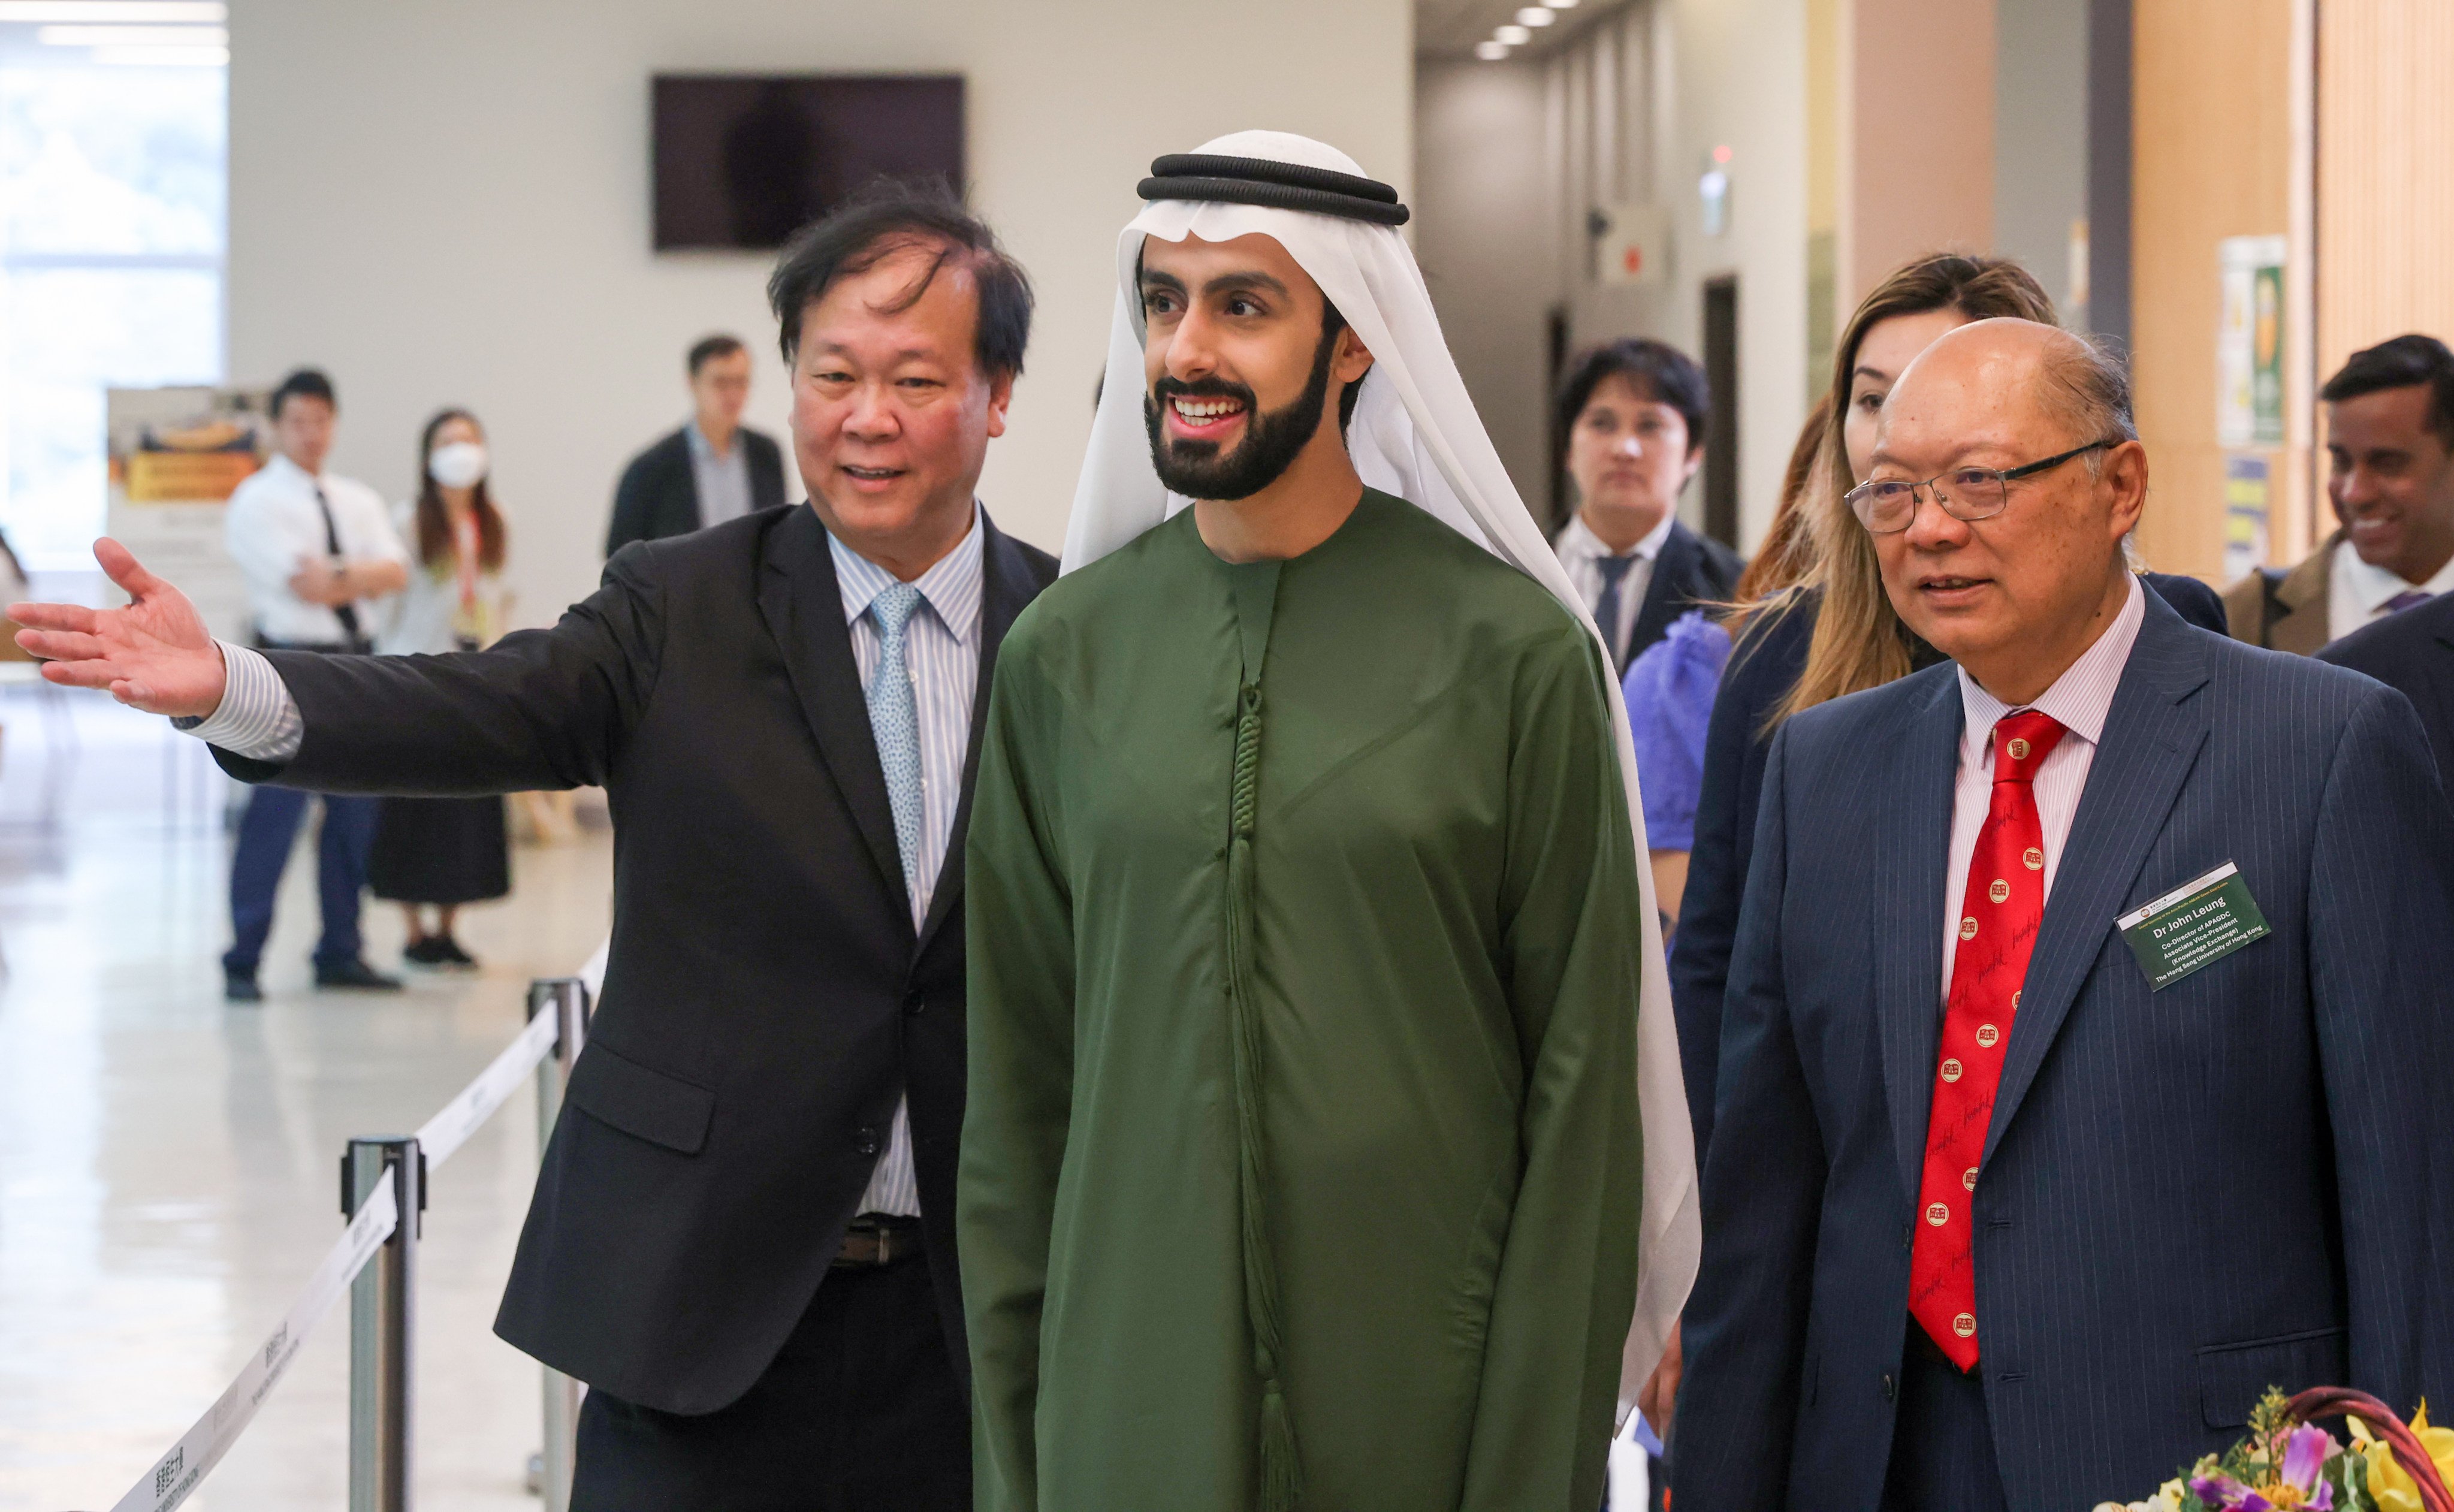 The city’s leader issued the promise after Sheikh Ali Al Maktoum (centre) was thrust into the media spotlight over his plans to invest in Hong Kong. Photo: Yik Yeung-man